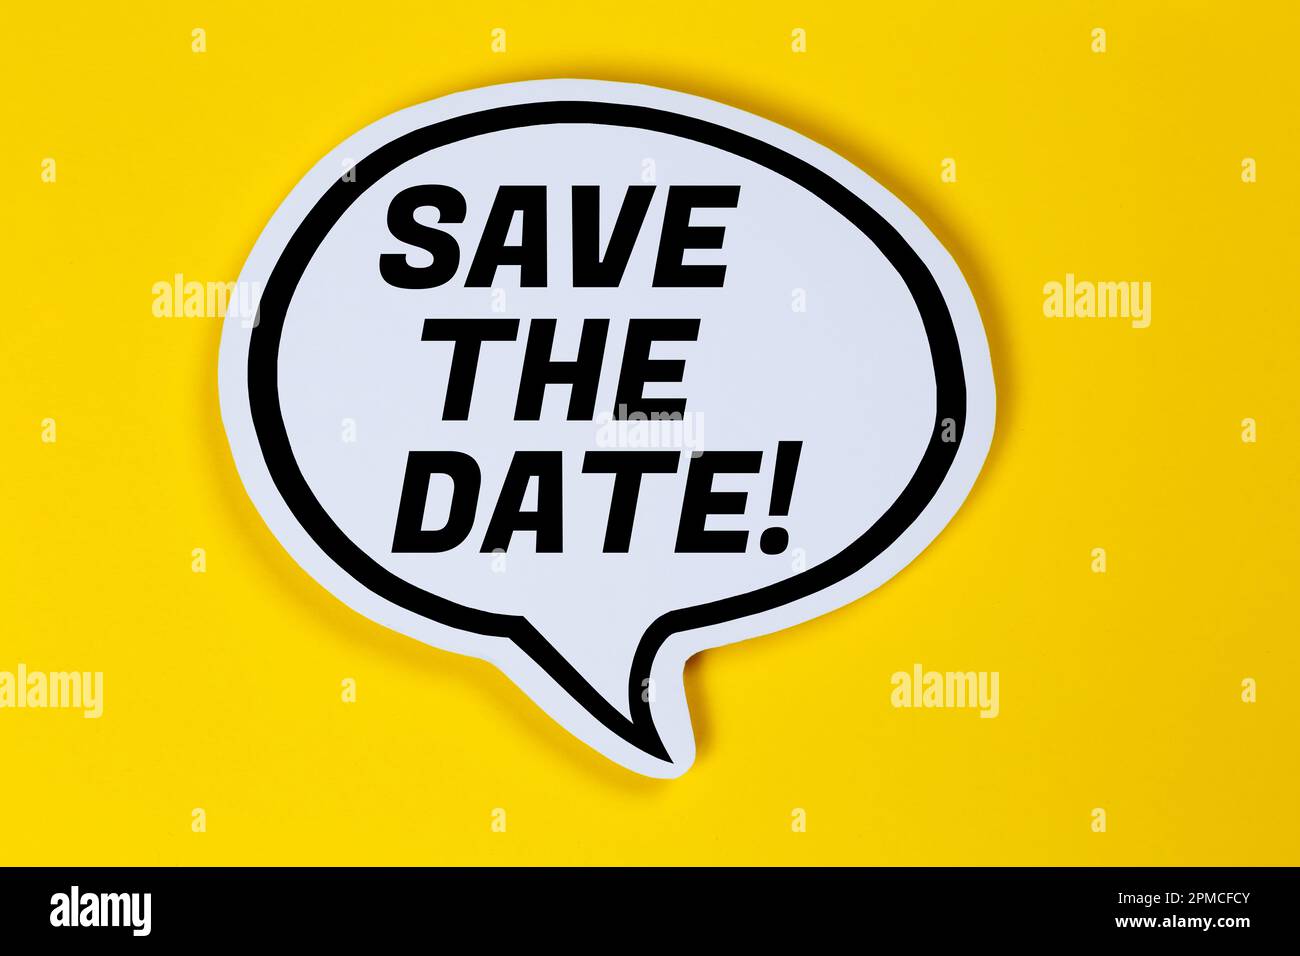 Save the date invitation message information in a speech bubble communication info concept Stock Photo